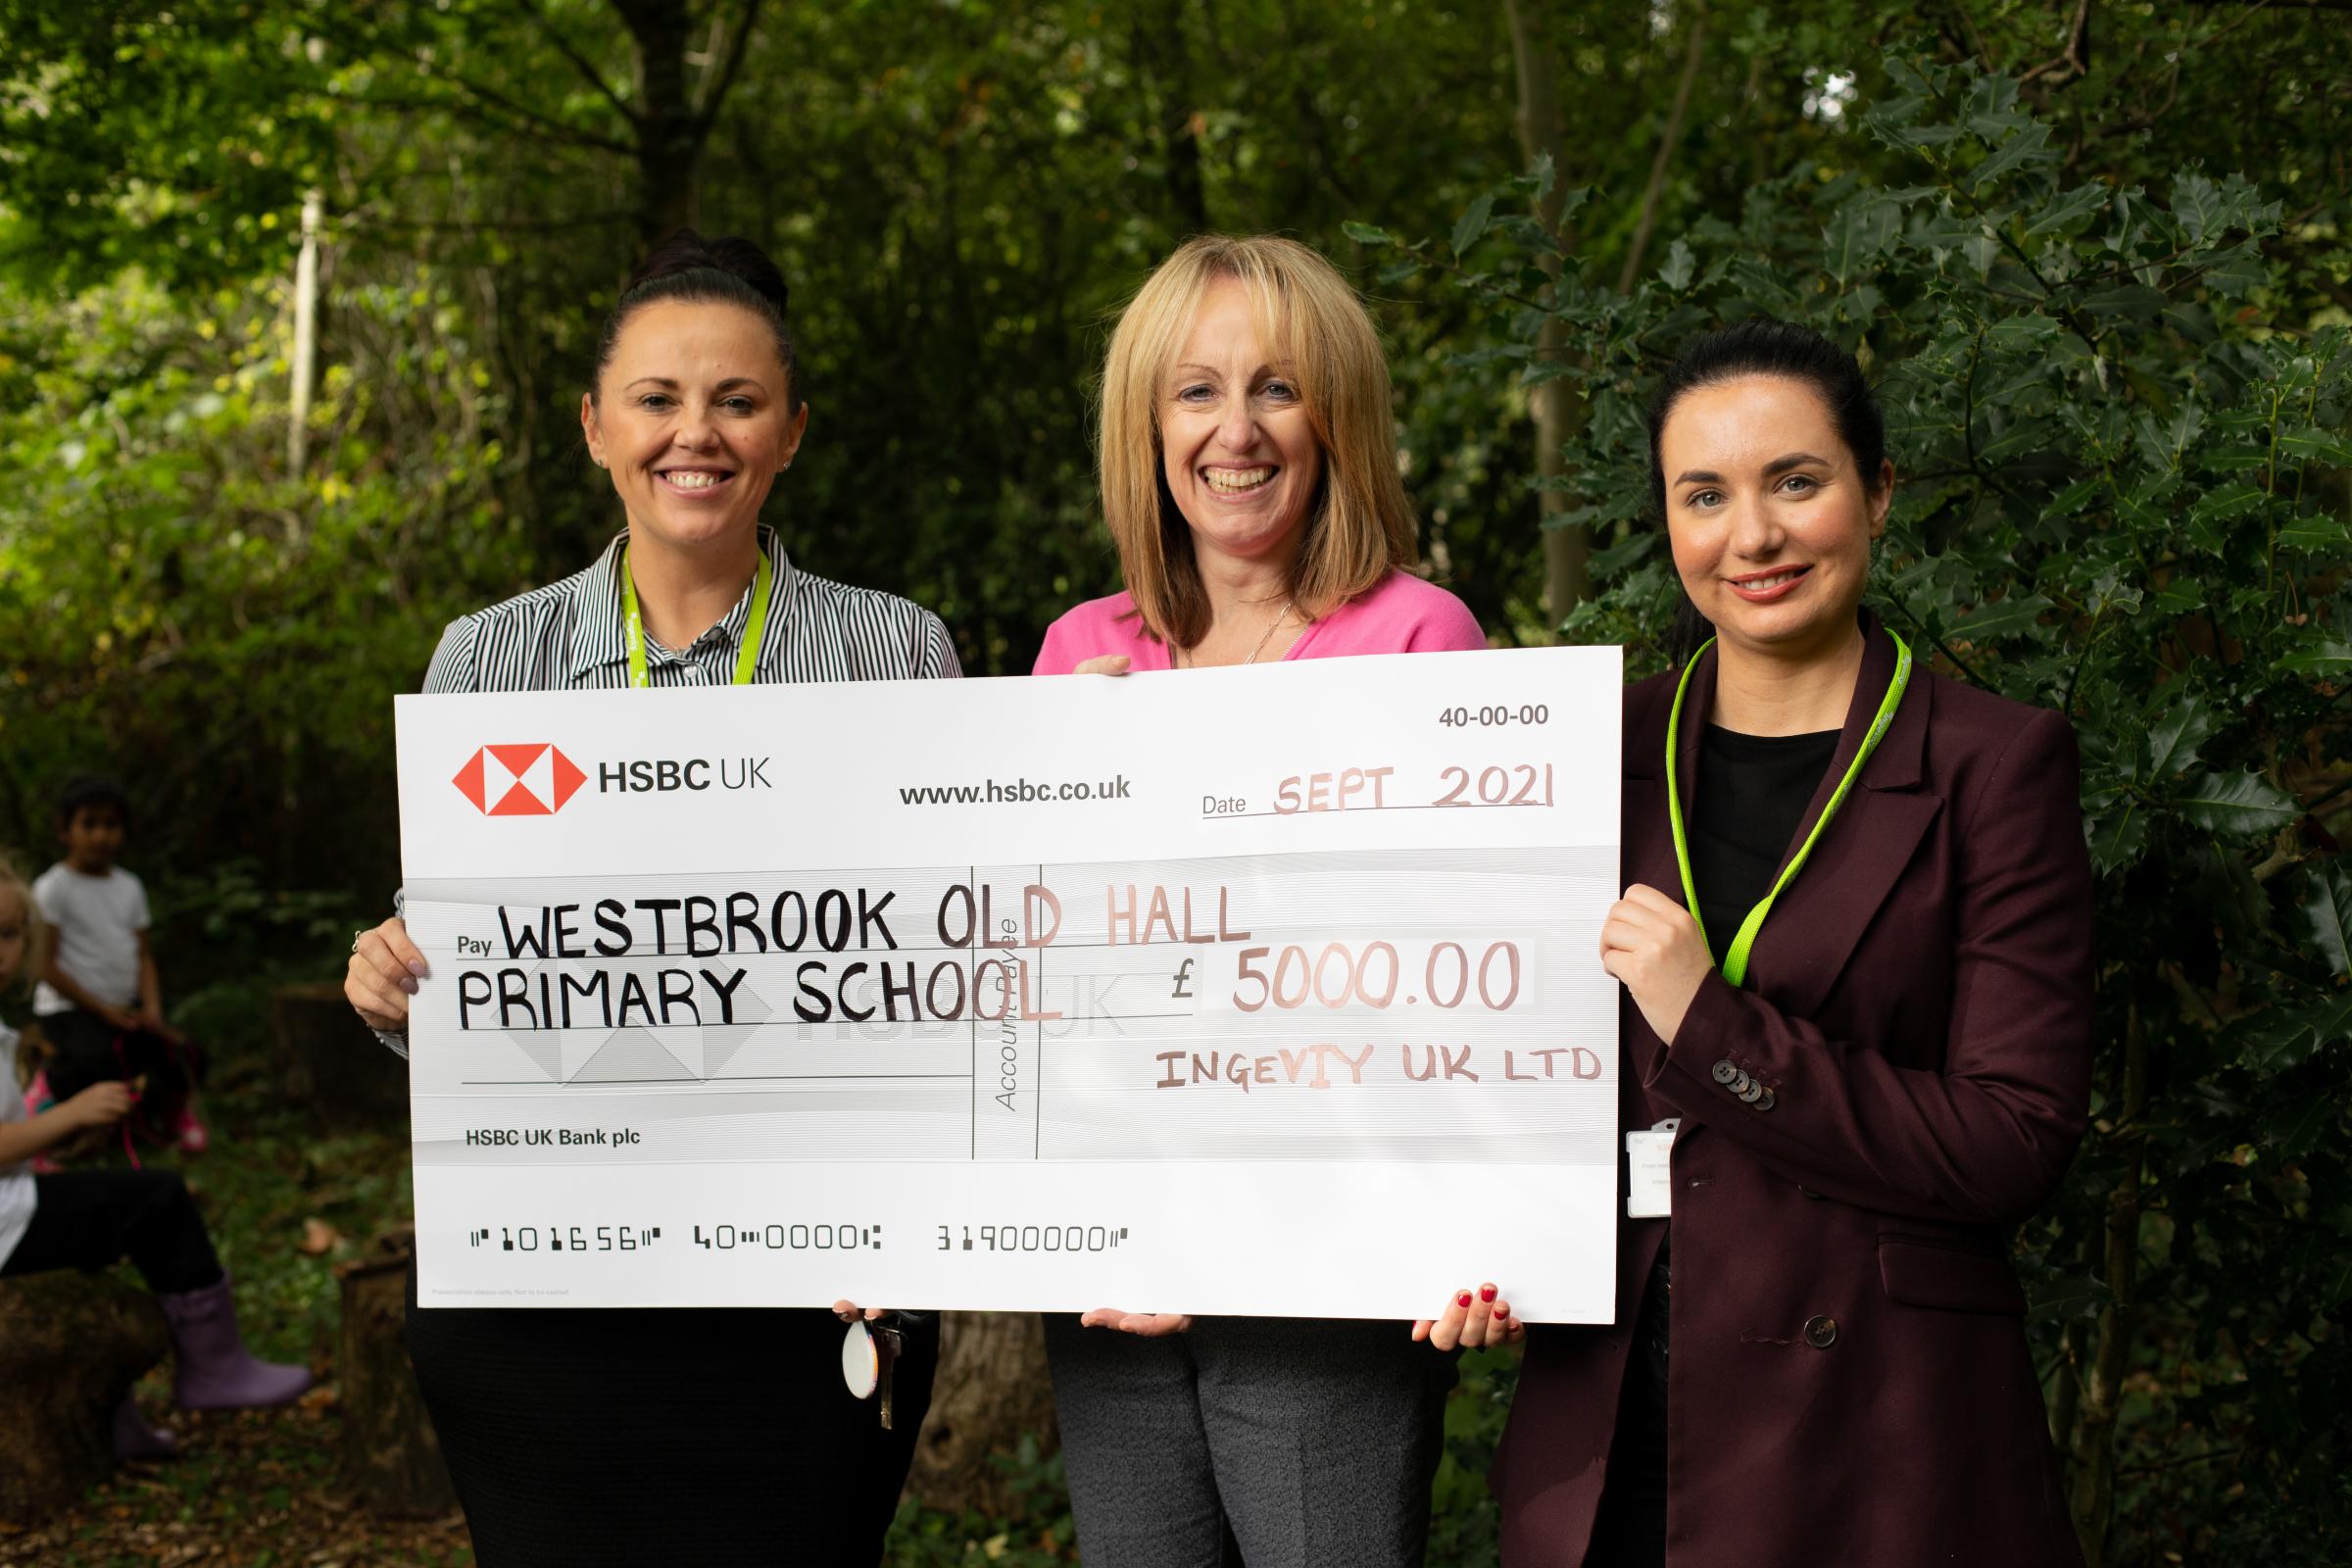 Primary school ‘delighted’ by generous donation to develop natural classroom